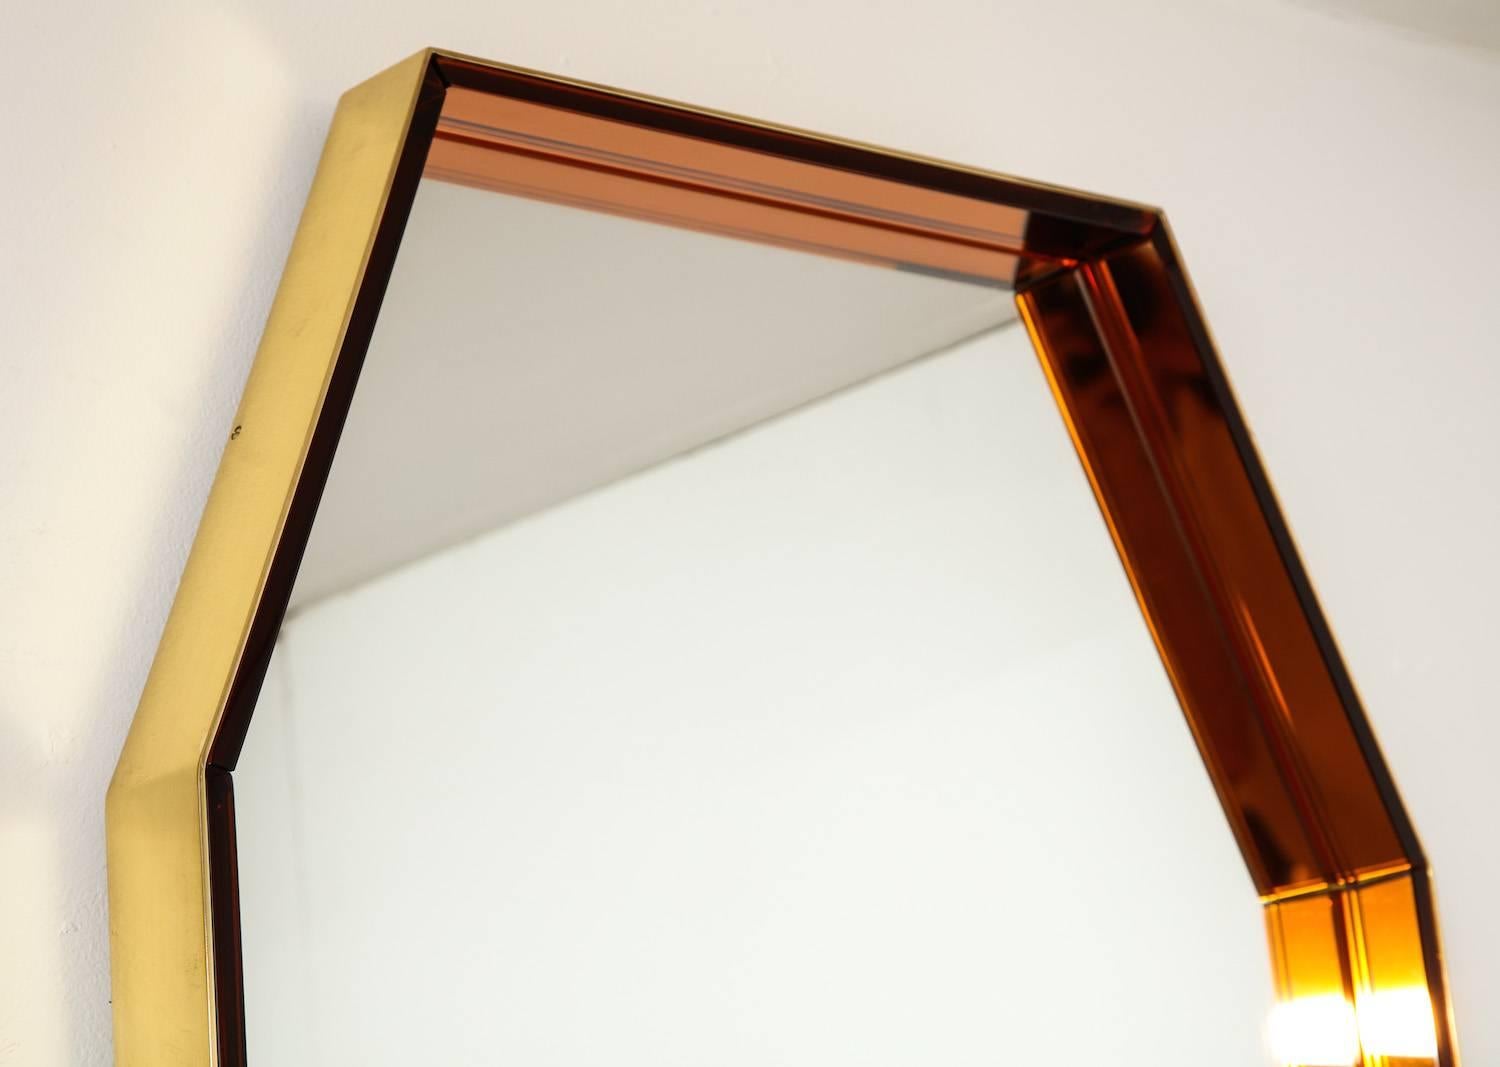 Octagonal wall mirror #2355 by Fontana Arte. Solid brass frame with brushed finish. Frame interior lined with copper colored glass. This rare form can be hung vertically or horizontally. A pair is shown here, but they are being offered individually,